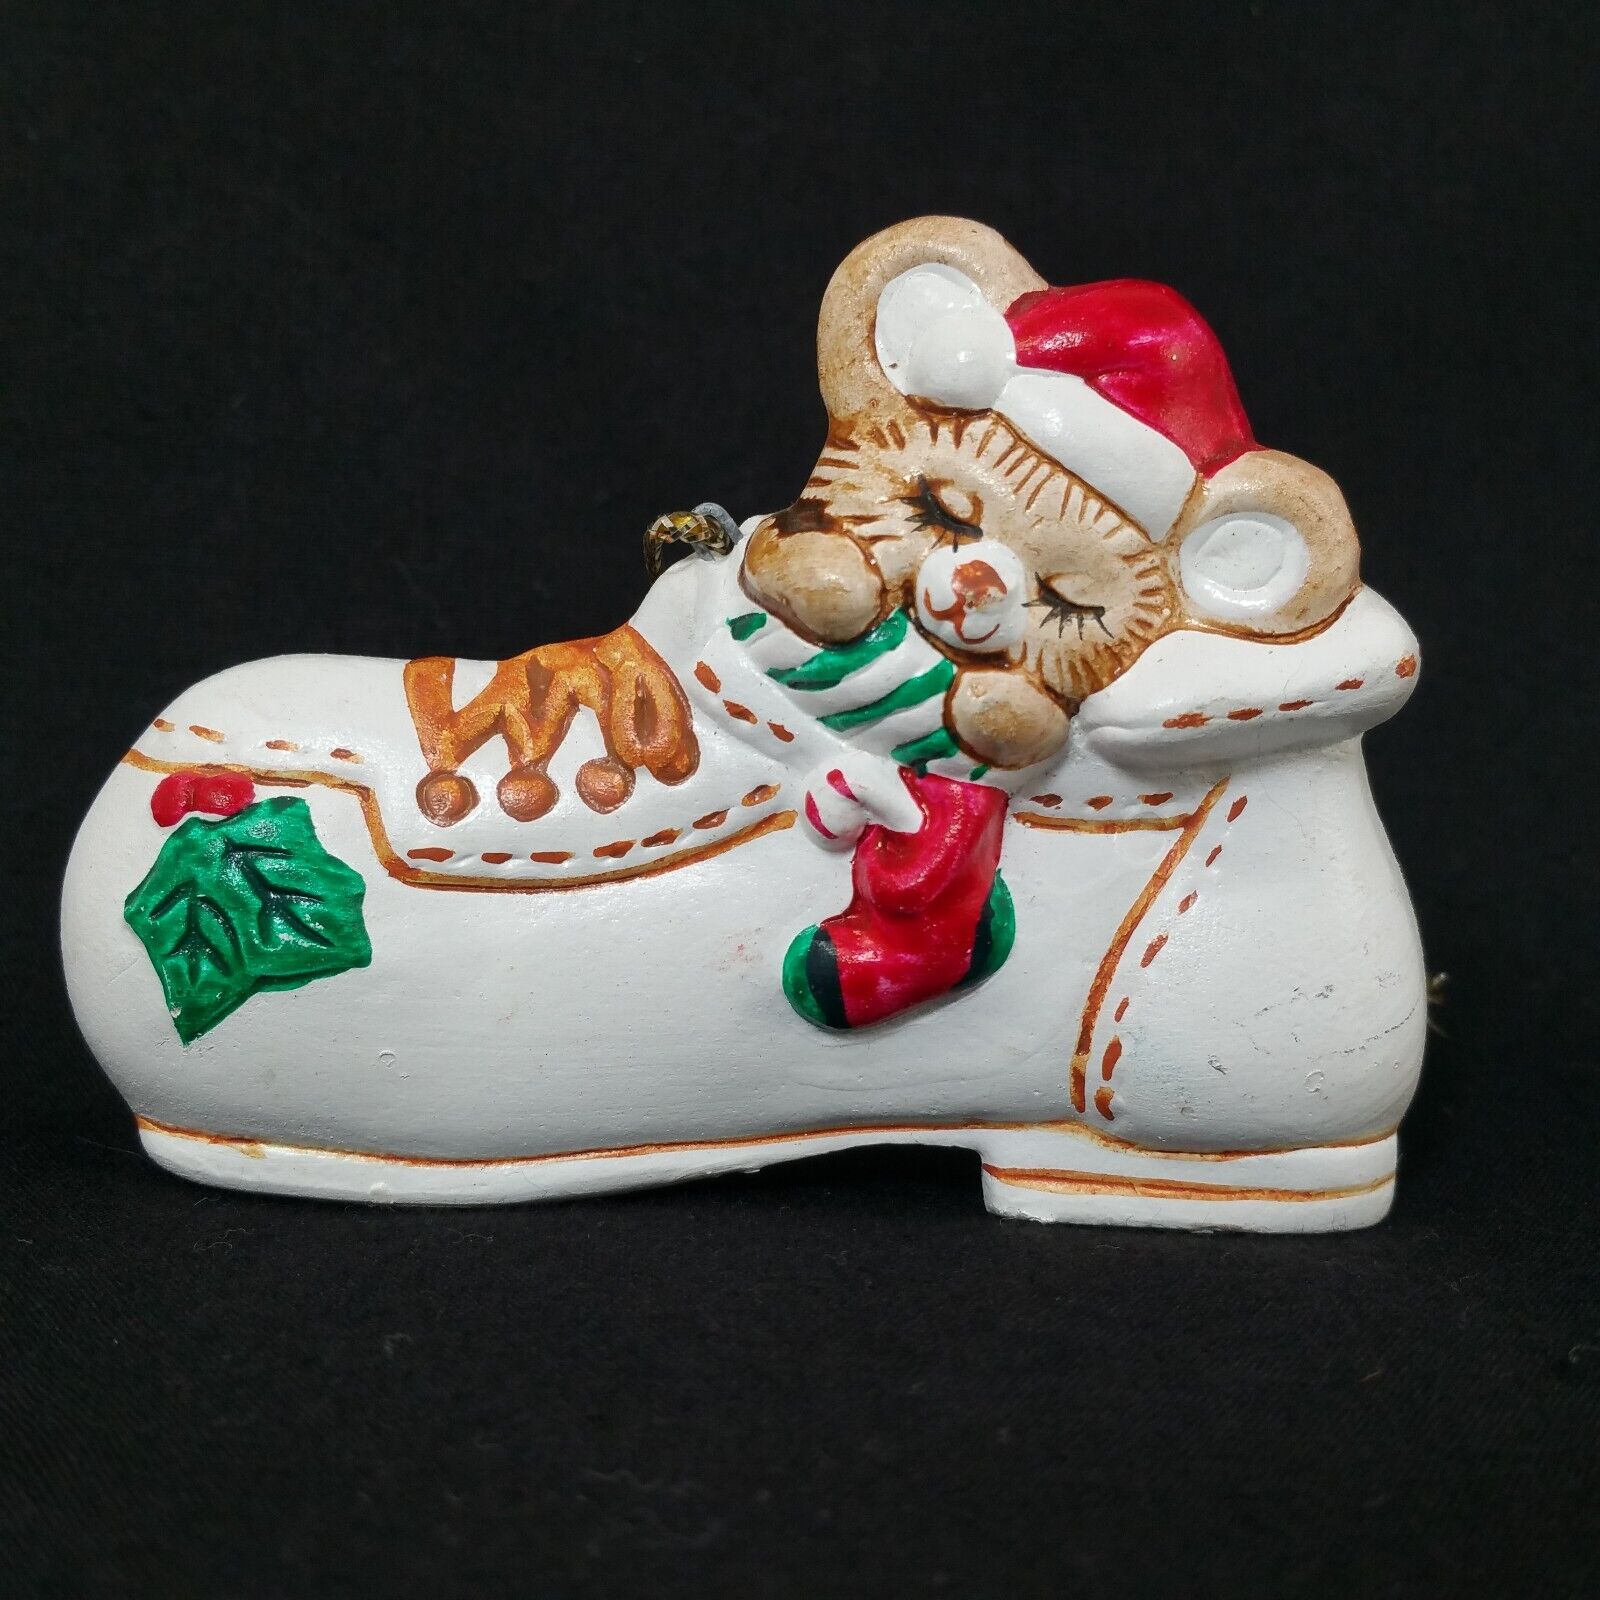 Vintage Russ Mouse Sleeping In A Shoe Ceramic Christmas Ornament